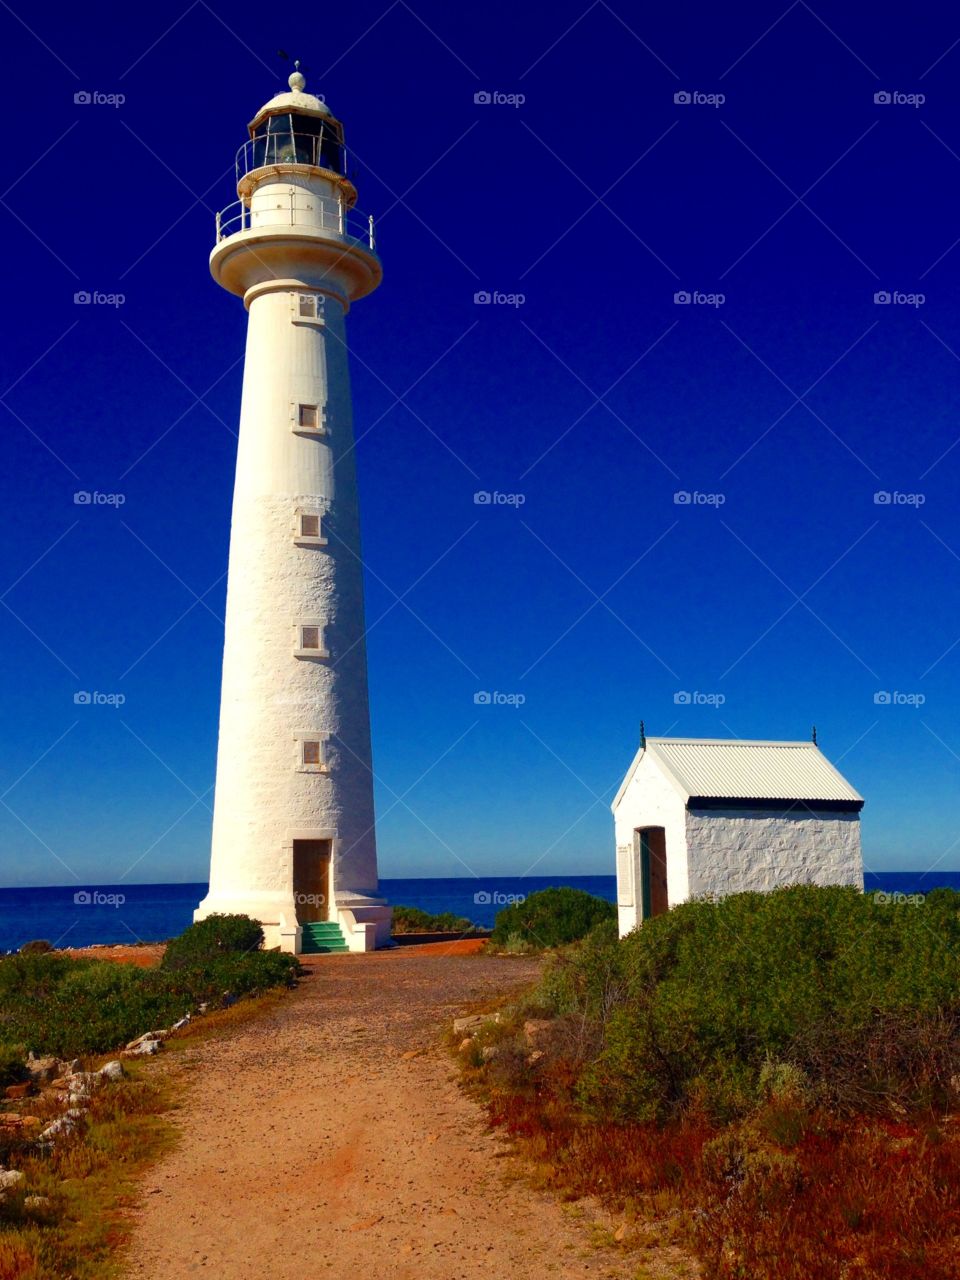 The Point Lowly Lighthouse, Whyalla, South Australia. The Point Lowly Lighthouse on North End of Spencer Gulf